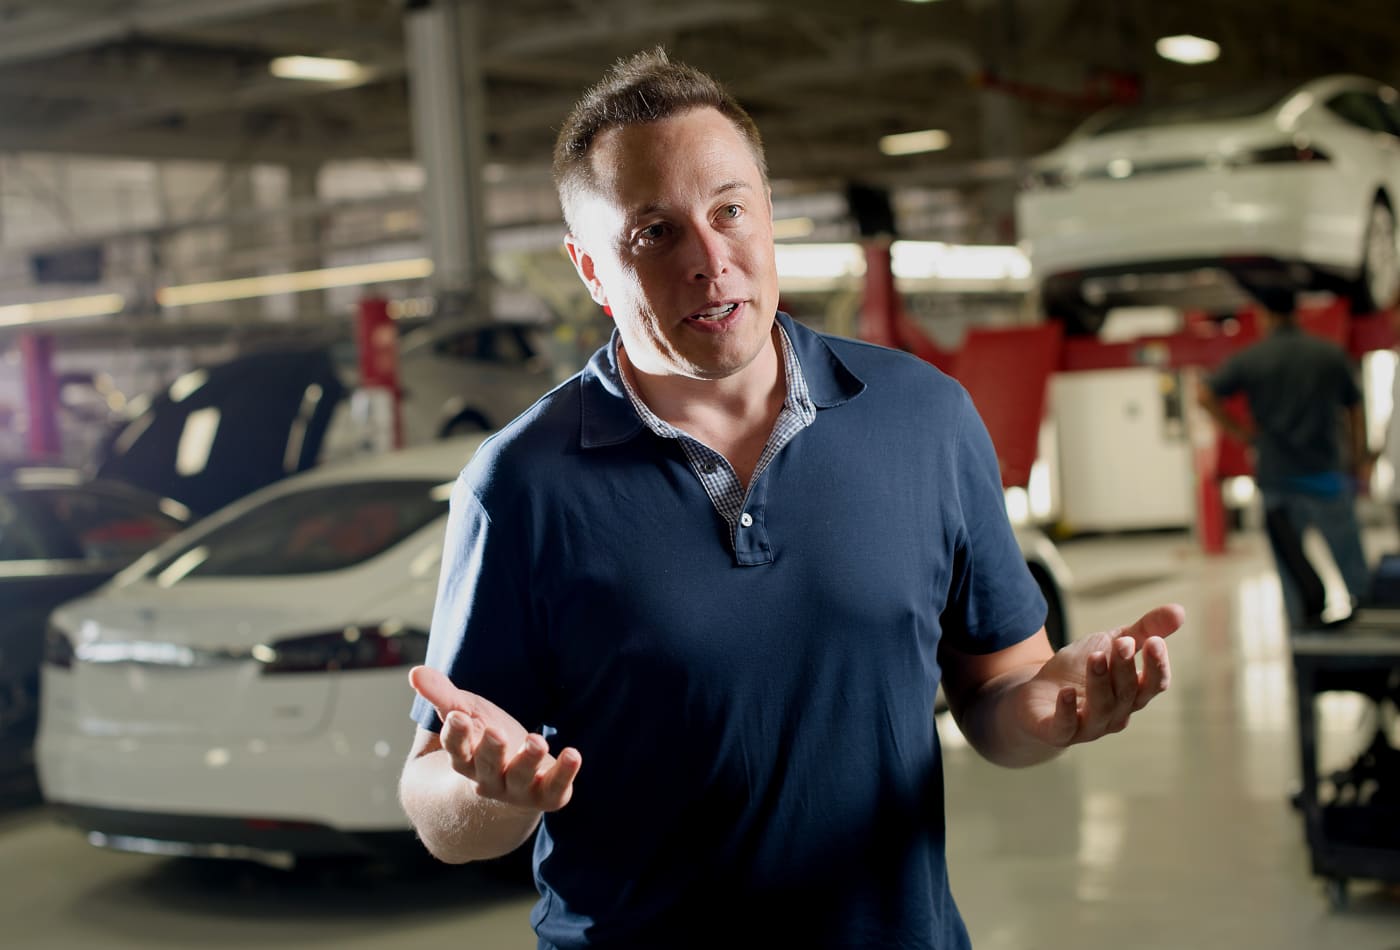 Elon Musk, co-founder and chief executive officer of Tesla Motors Inc., speaks during an interview at the company's assembly plant in Fremont, California, U.S., on Wednesday, July 10, 2013.